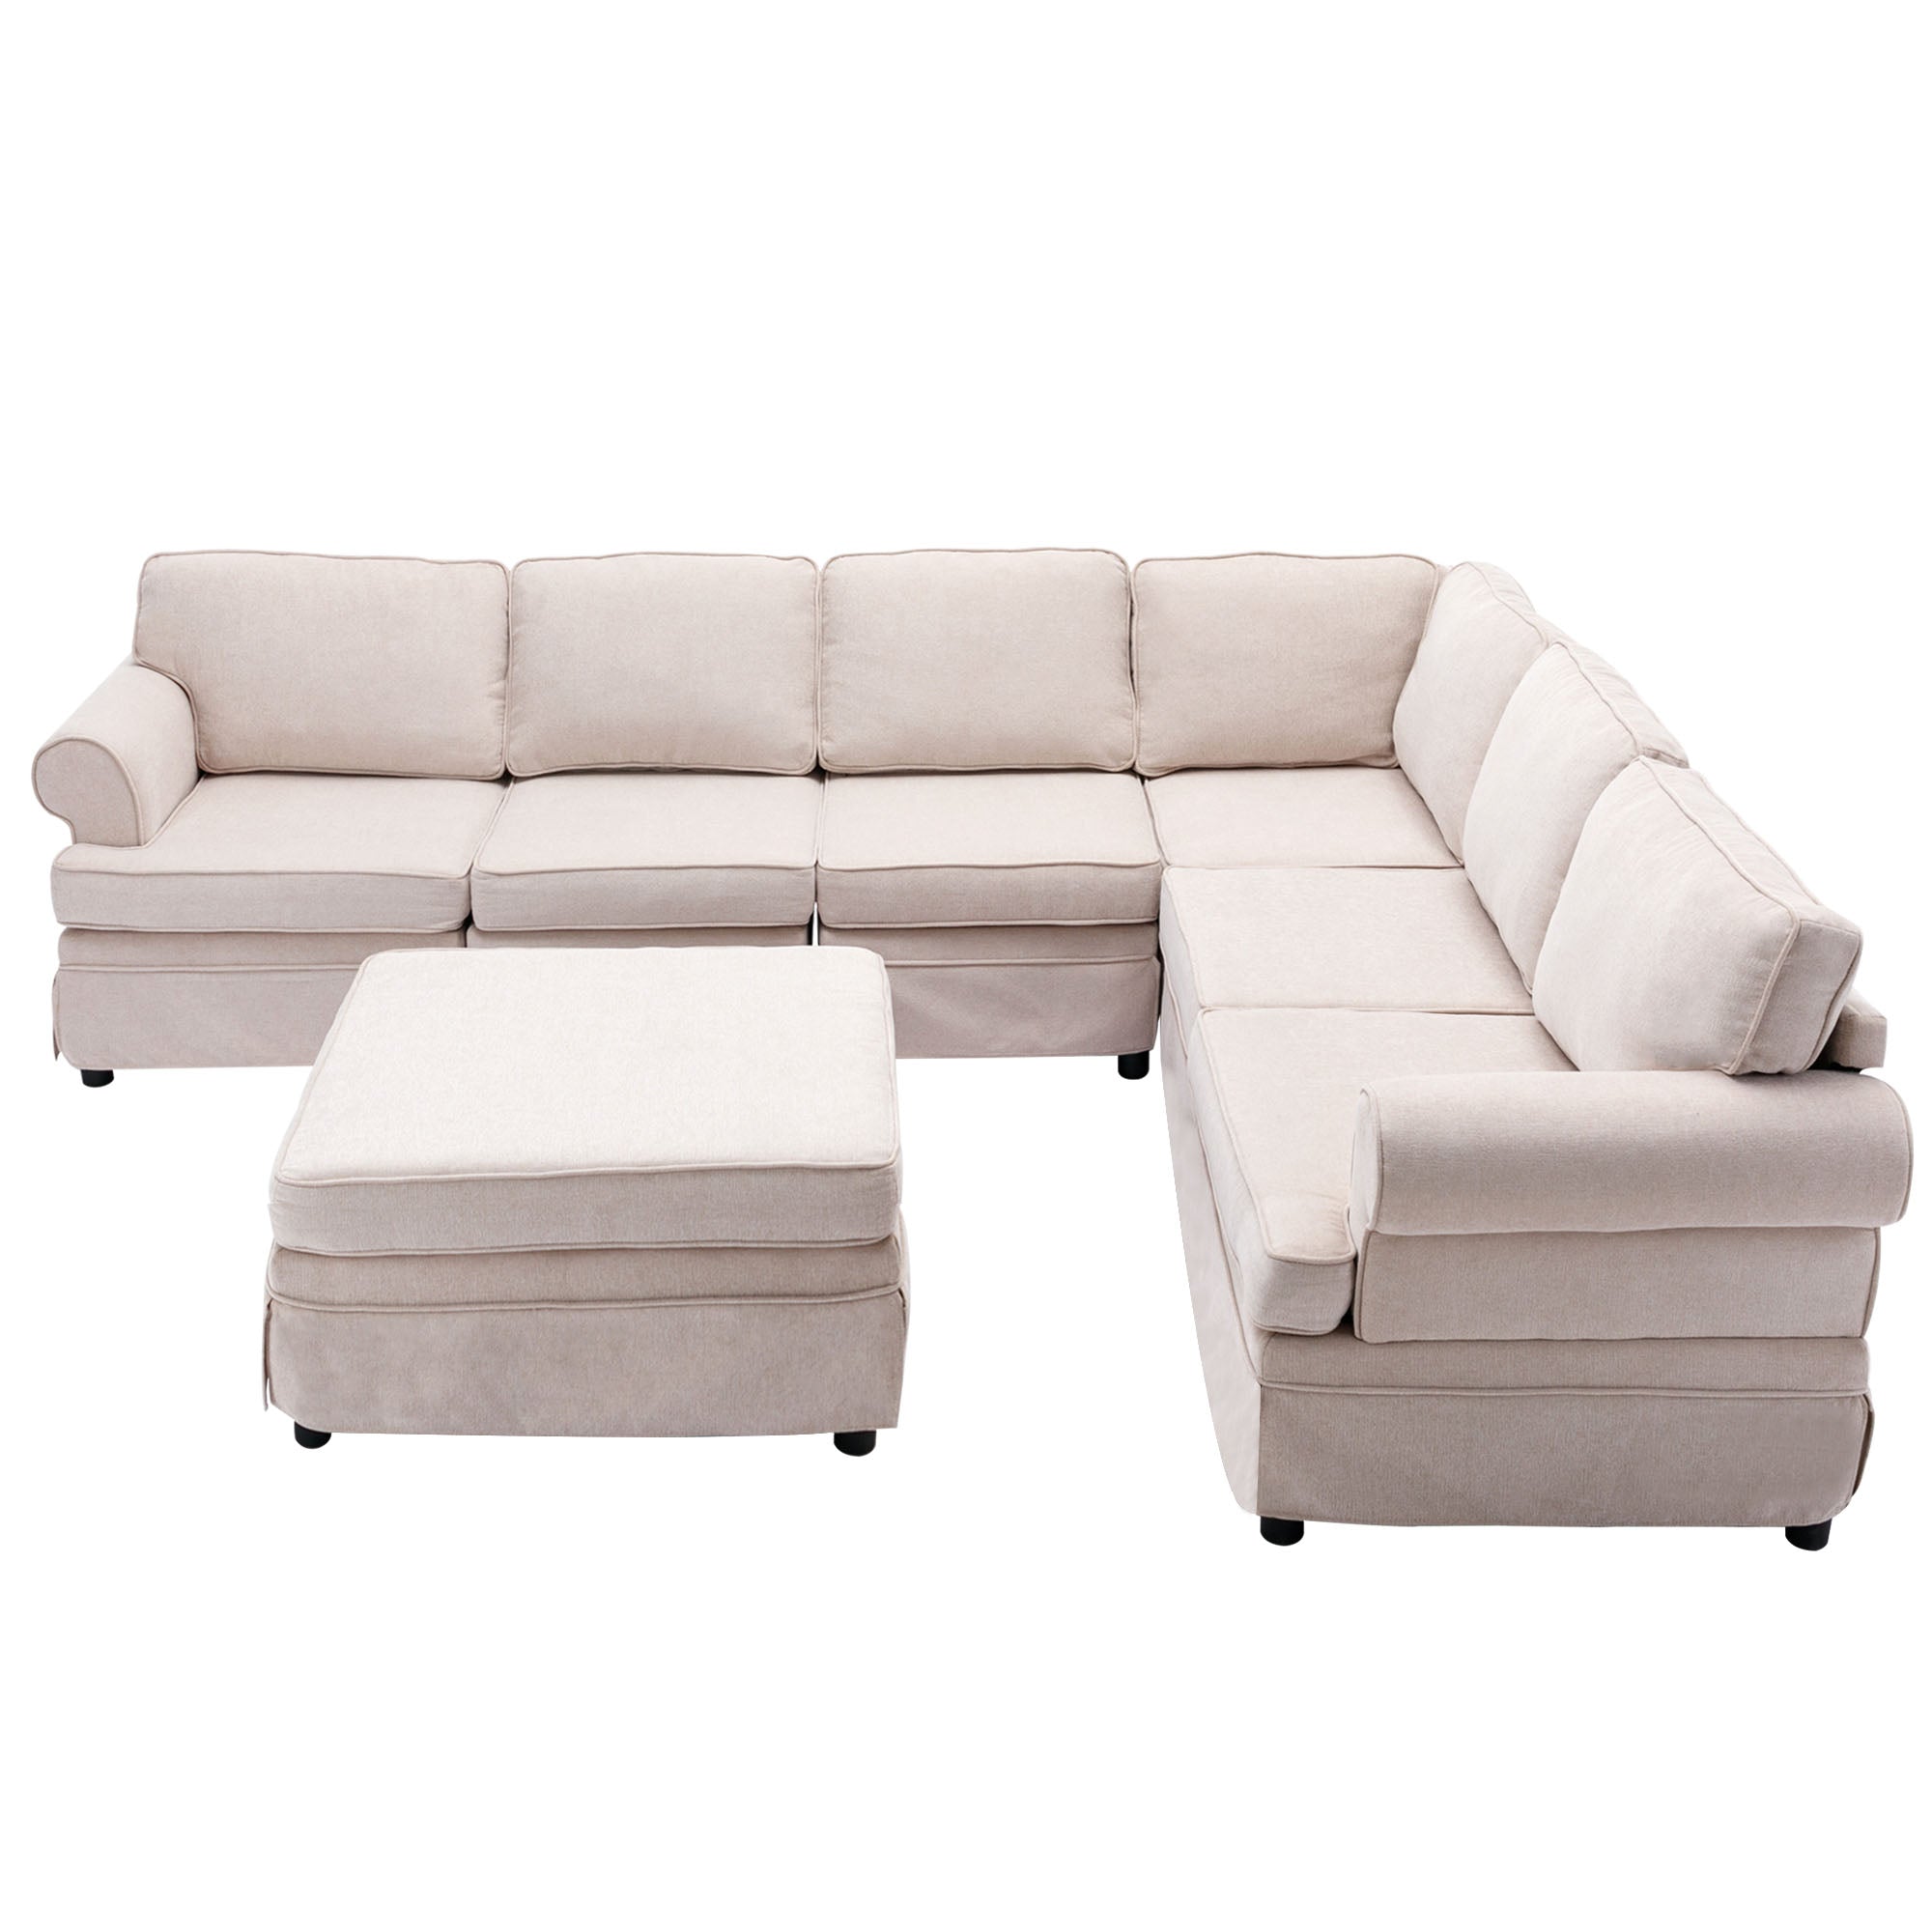 Bellemave 108.6" Fabric Upholstered Modular Sofa Collection, Modular Customizable ,Sectional Couch with removable Ottoman